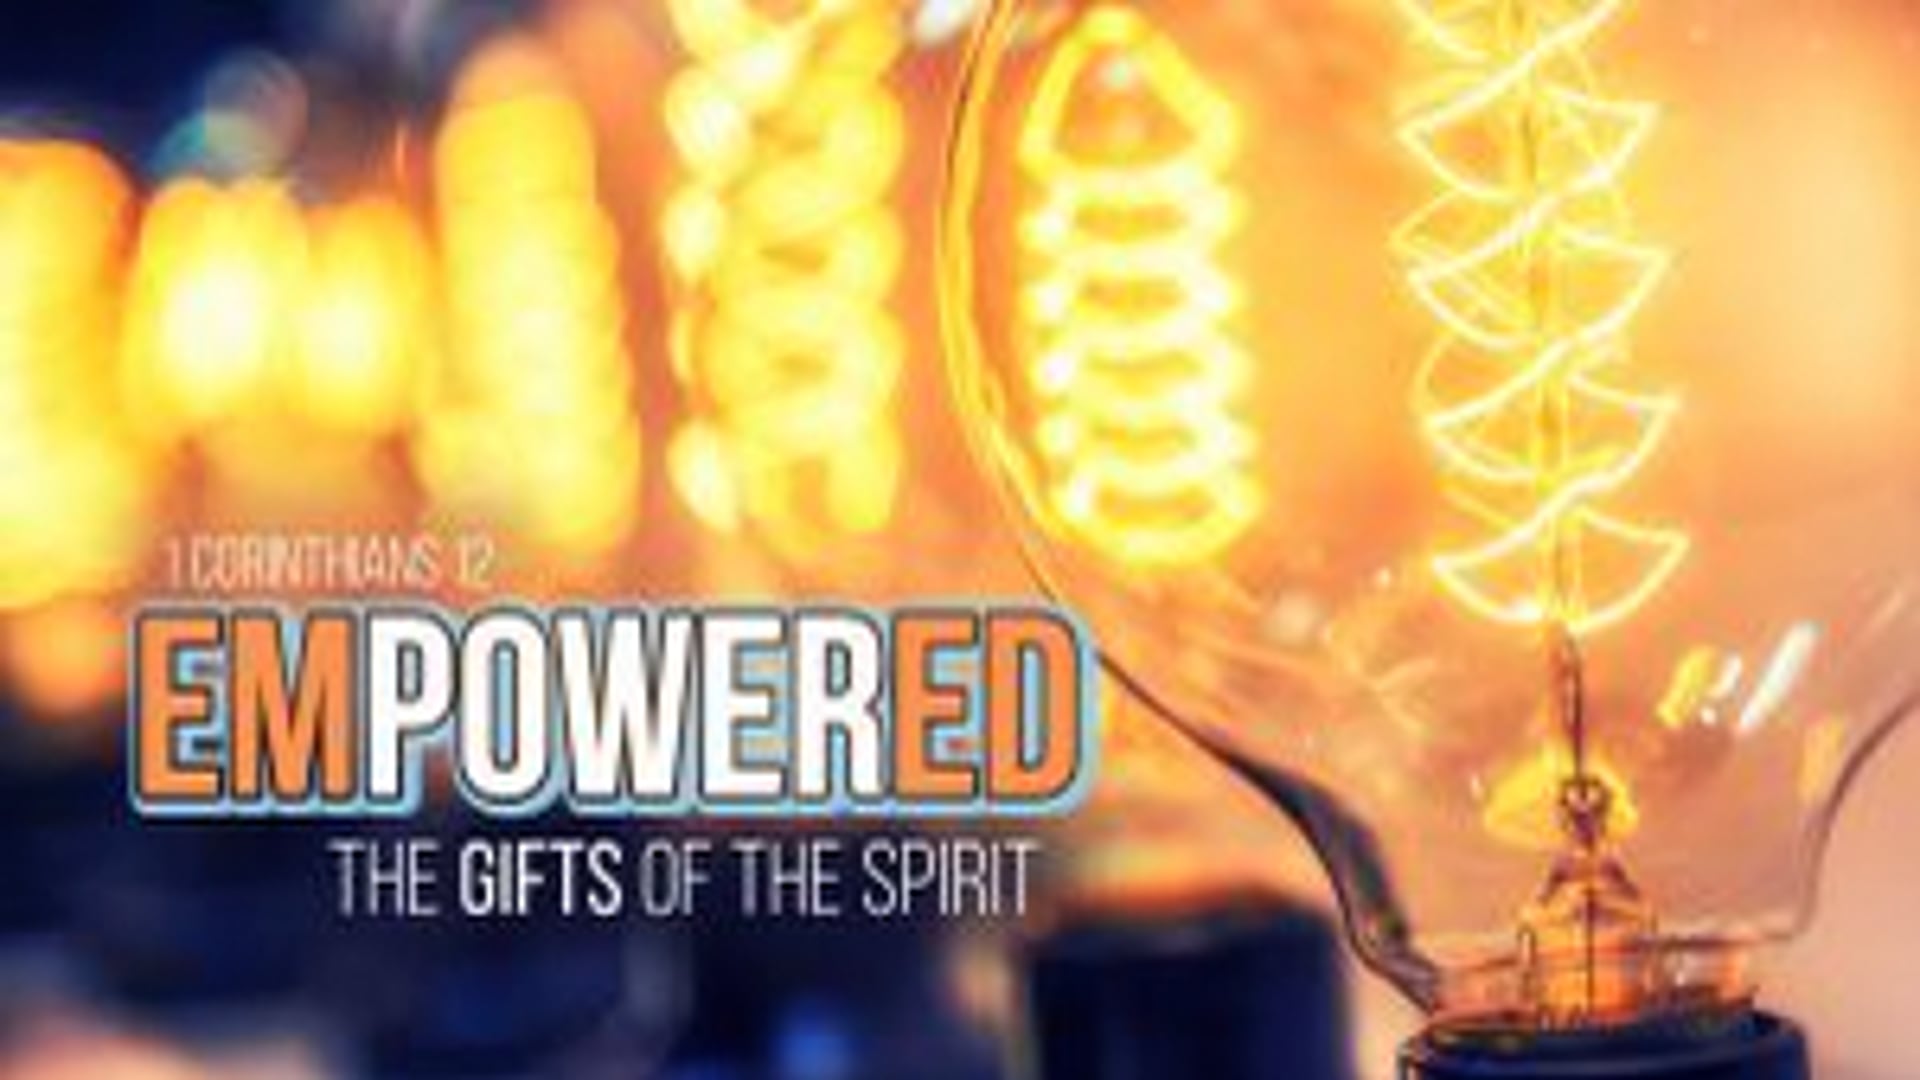 The power of the Spirit